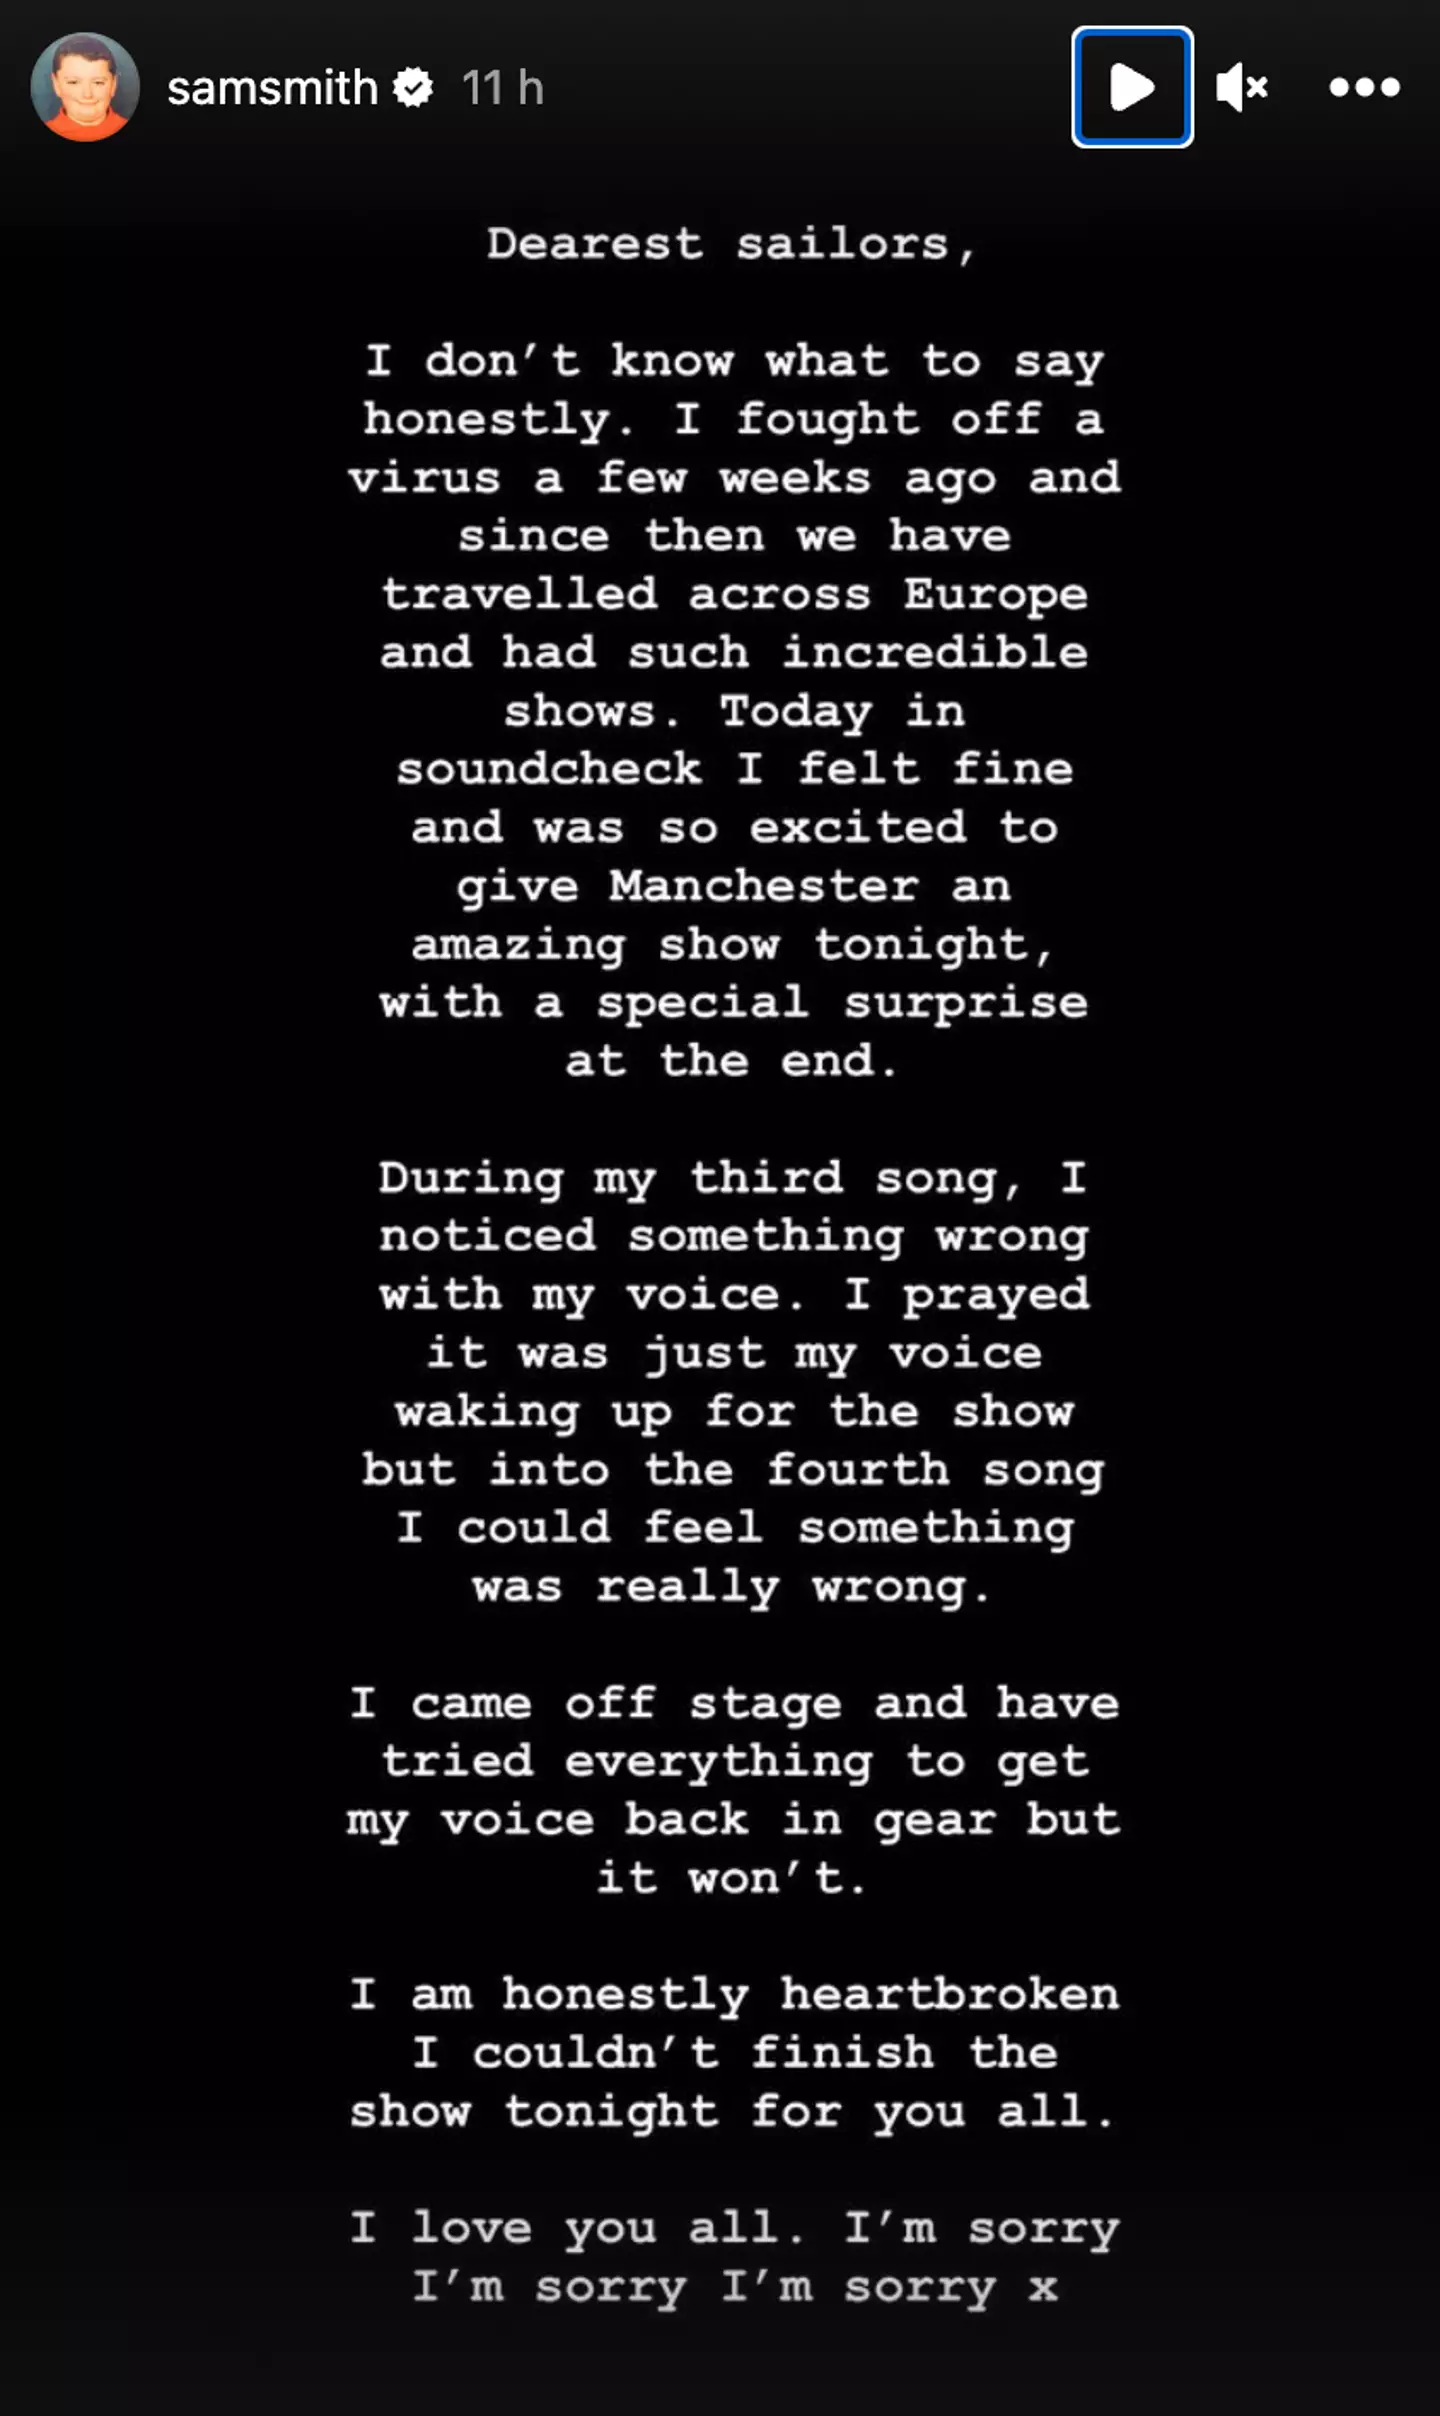 Sam issued an apology to fans.